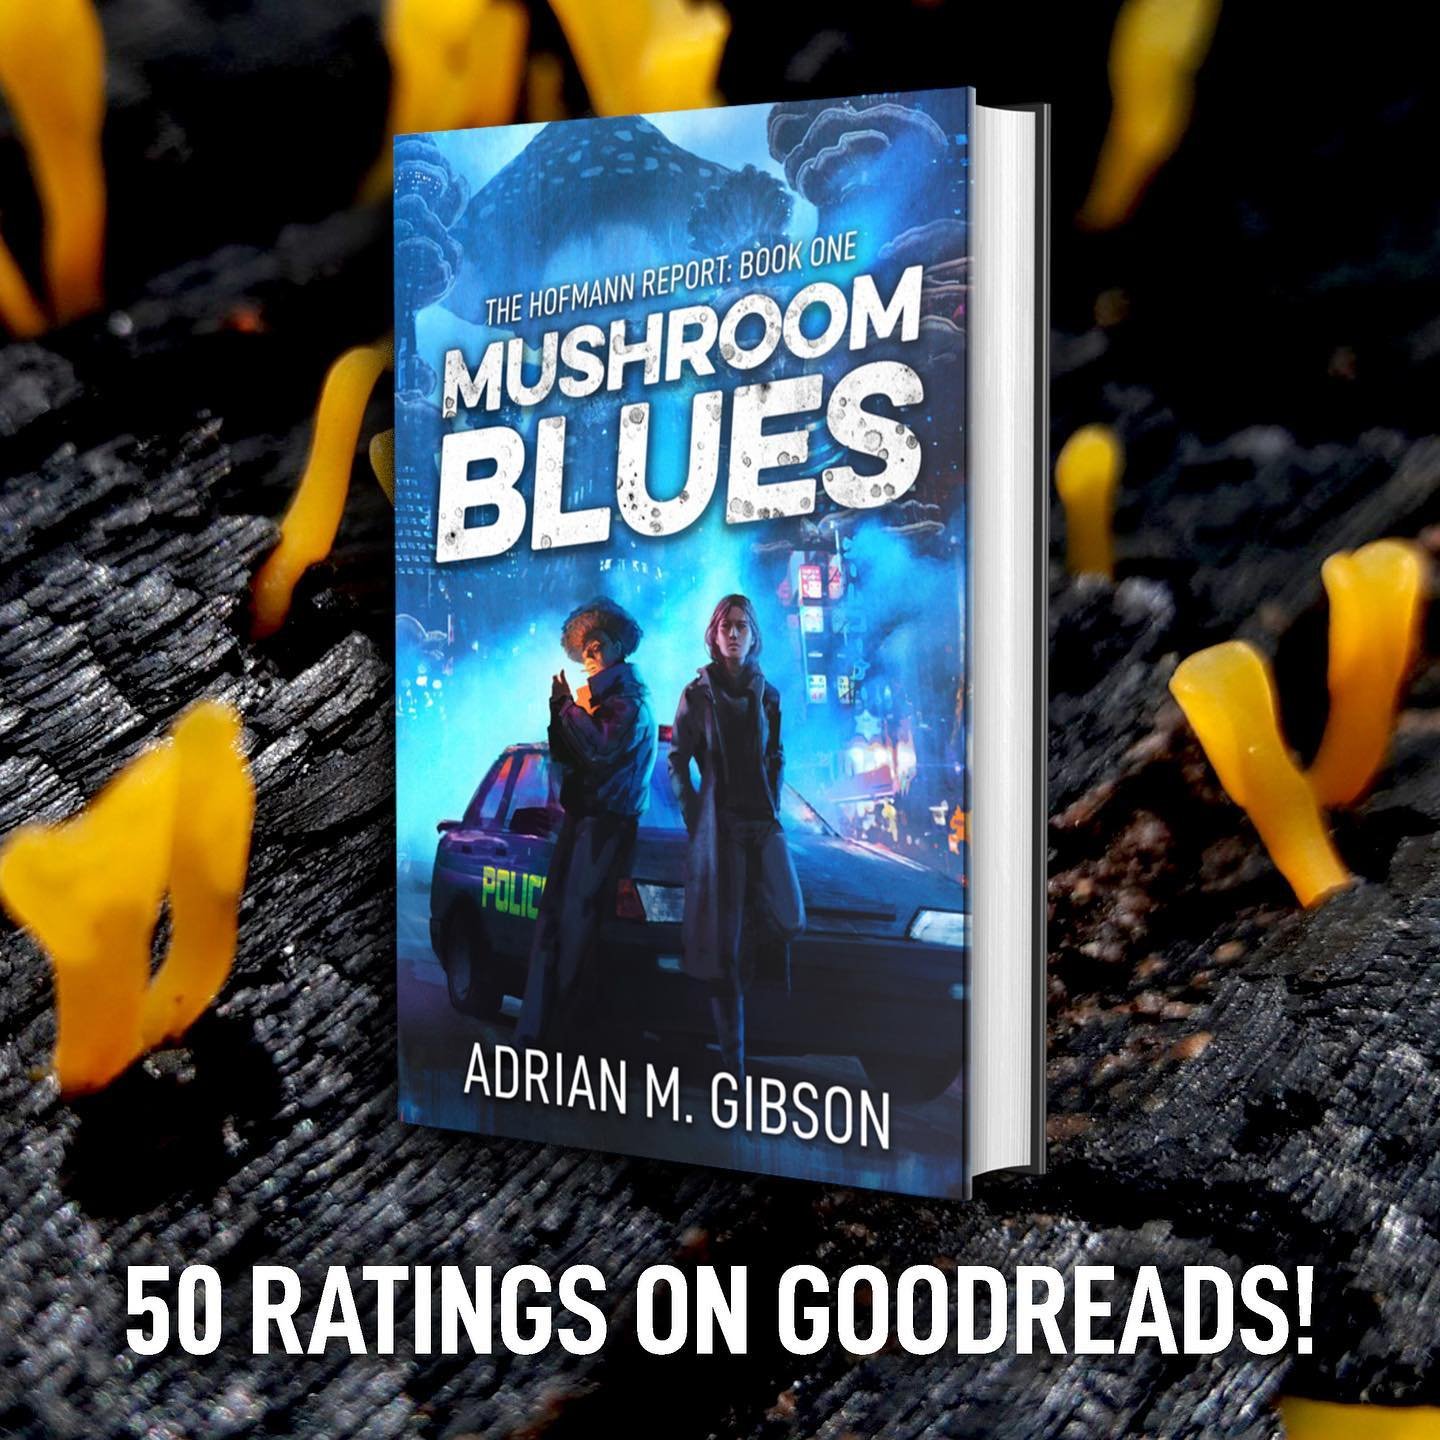 My novel #MushroomBlues has passed 50 ratings on Goodreads, with an average rating of 4.44/5! Thank you so much to everyone who has read, rated and/or reviewed the book 🍄

If you haven&rsquo;t already, BUY YOUR COPY TODAY in paperback/hardcover/eBoo